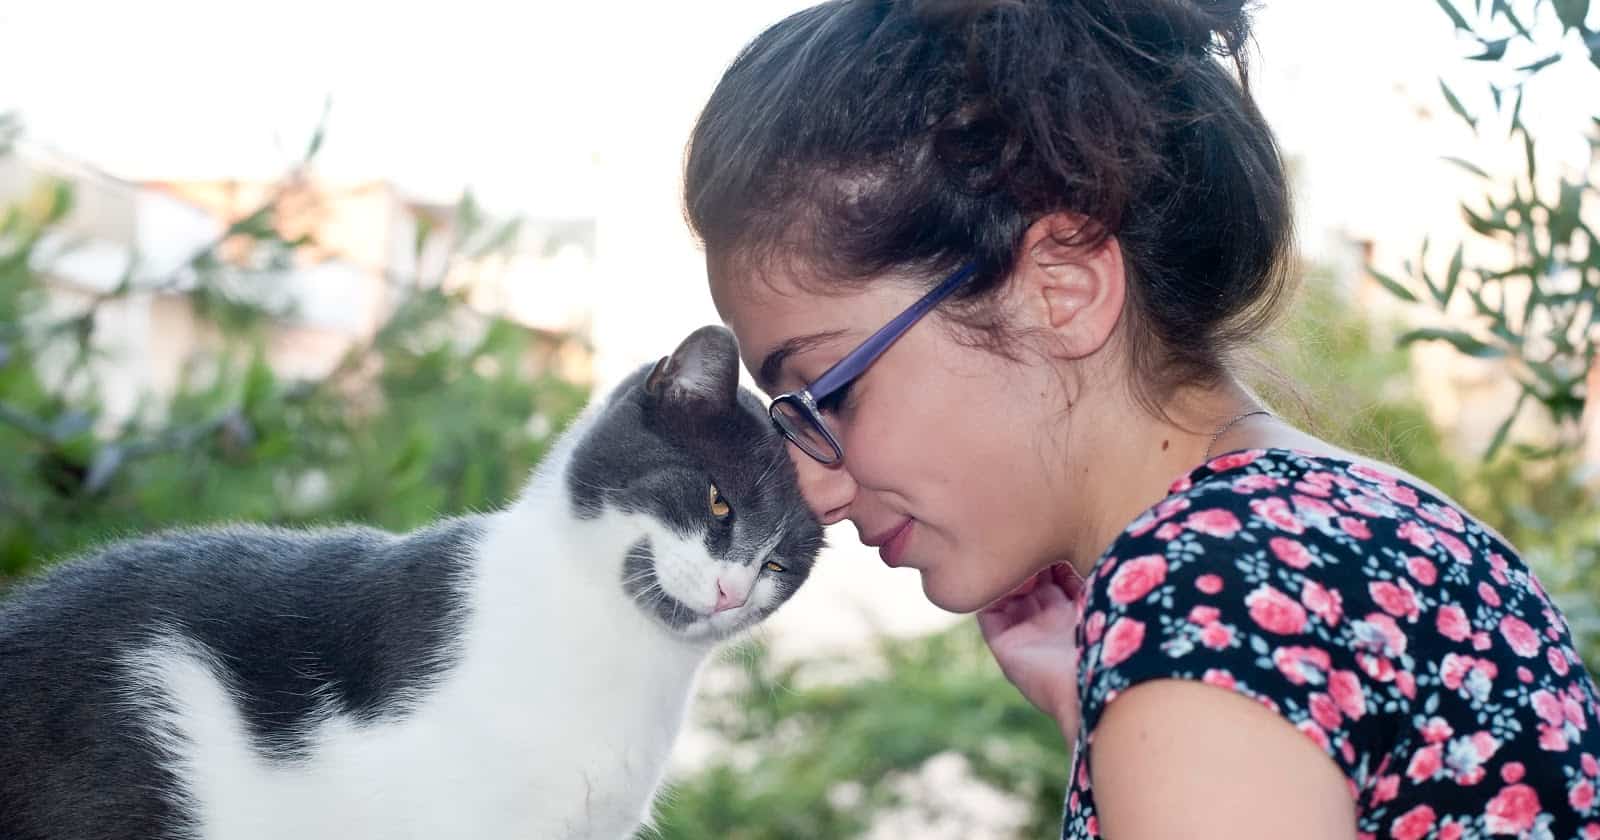 Why does my cat bite my hair? If you're curious about your kitty's fascination with chewing on your lustrous locks, read on for the answers!